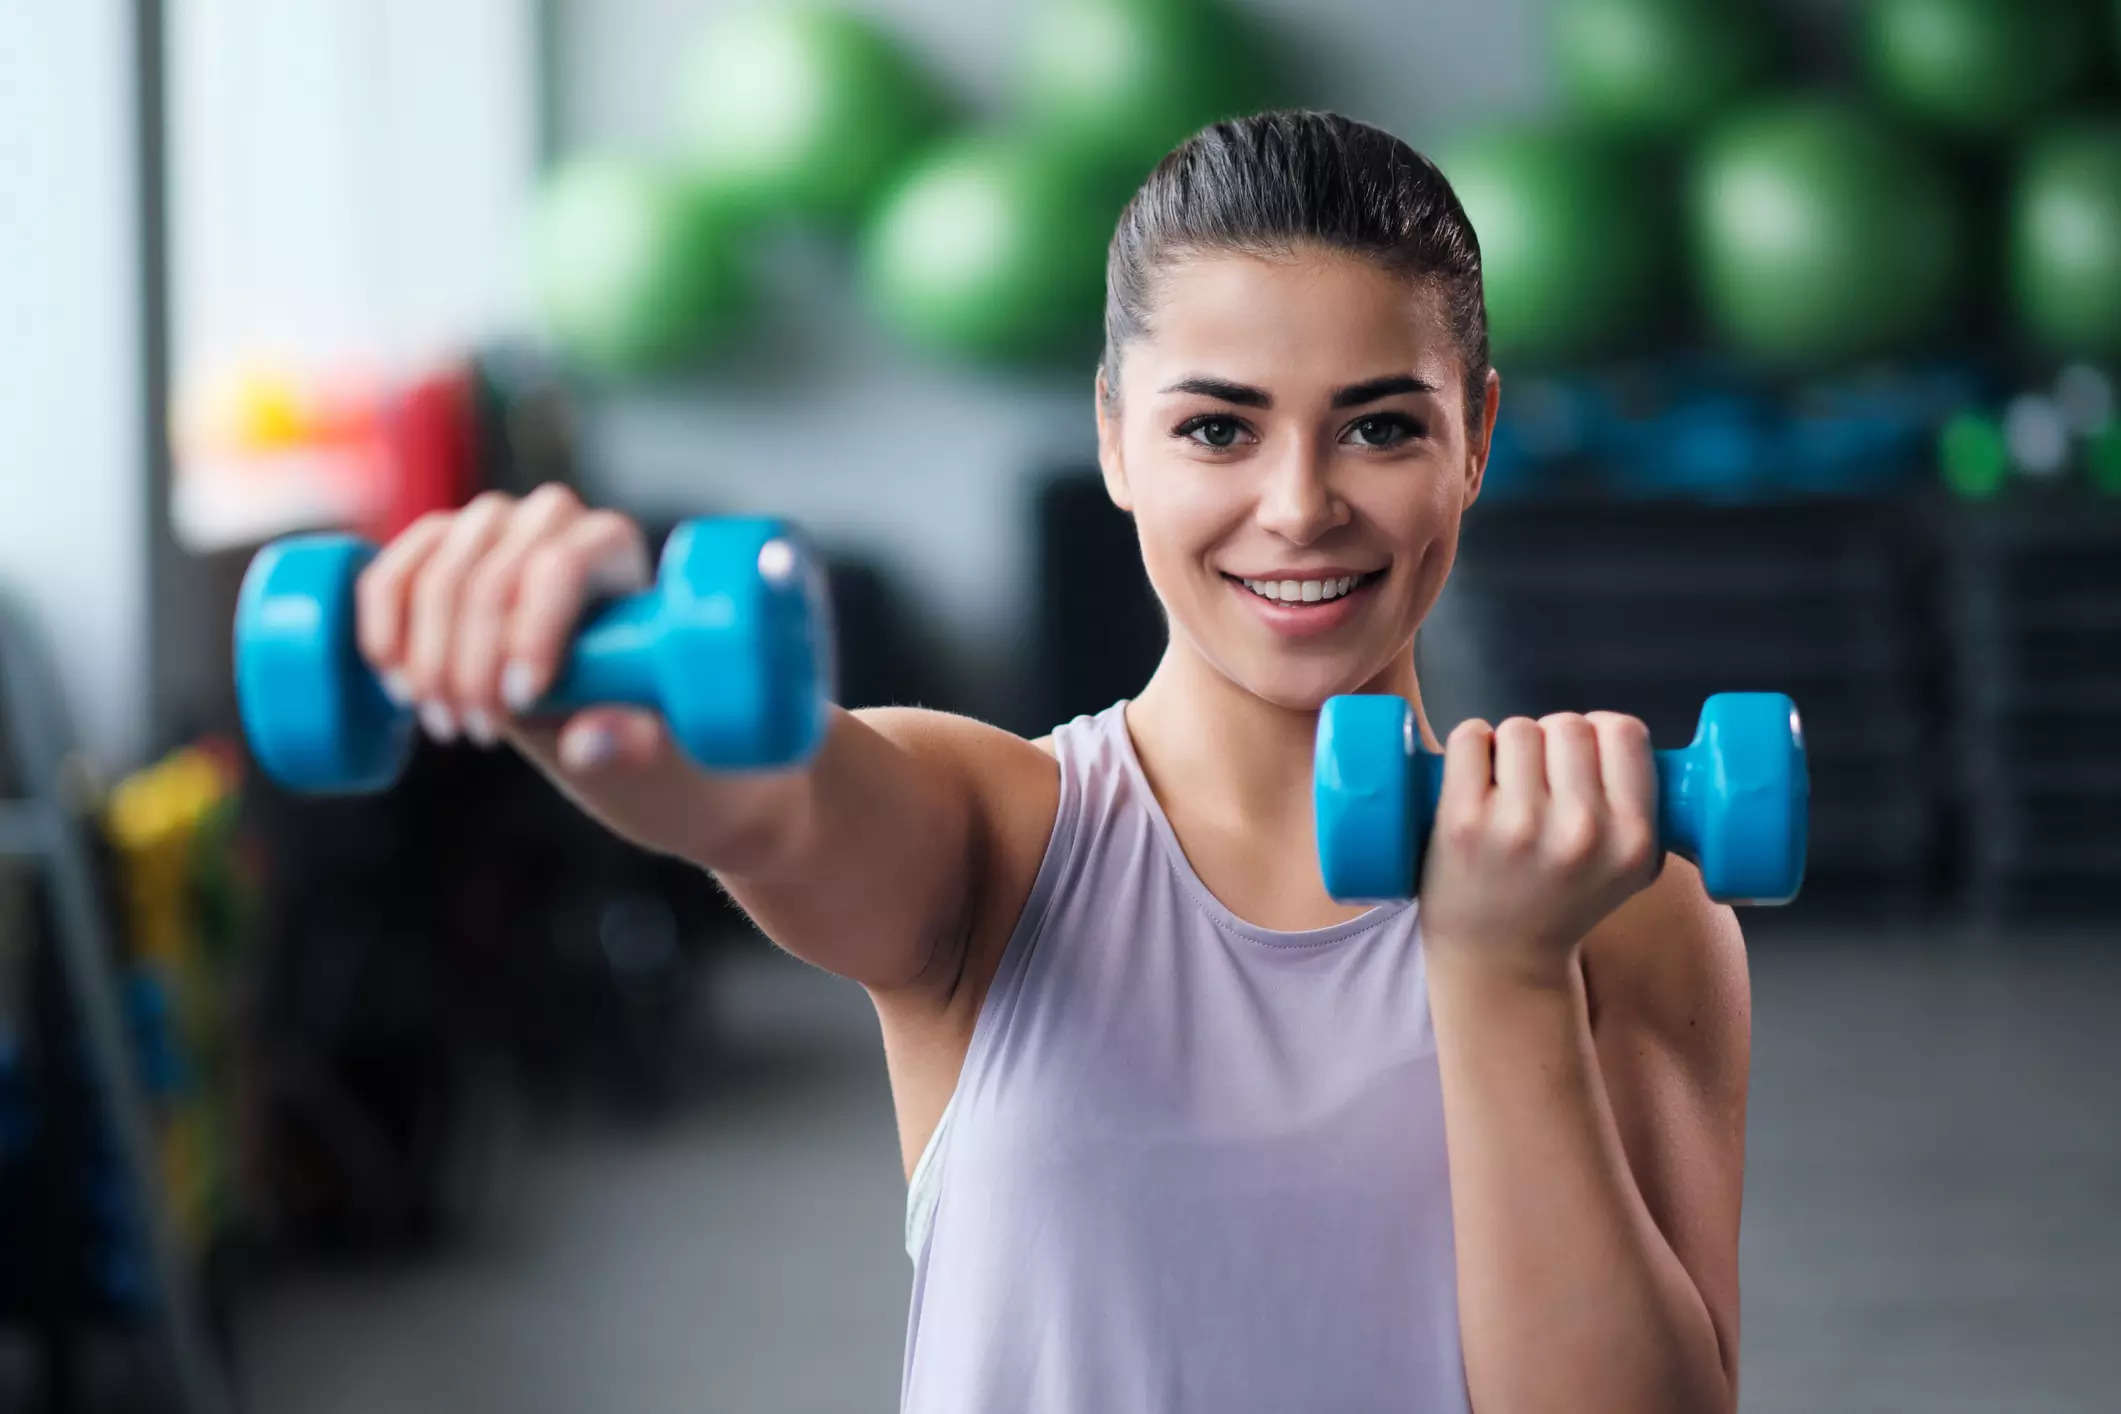 With this, researchers concluded that lowering a heavy dumbbell slowly once or six times a week is good enough to build muscle strength.